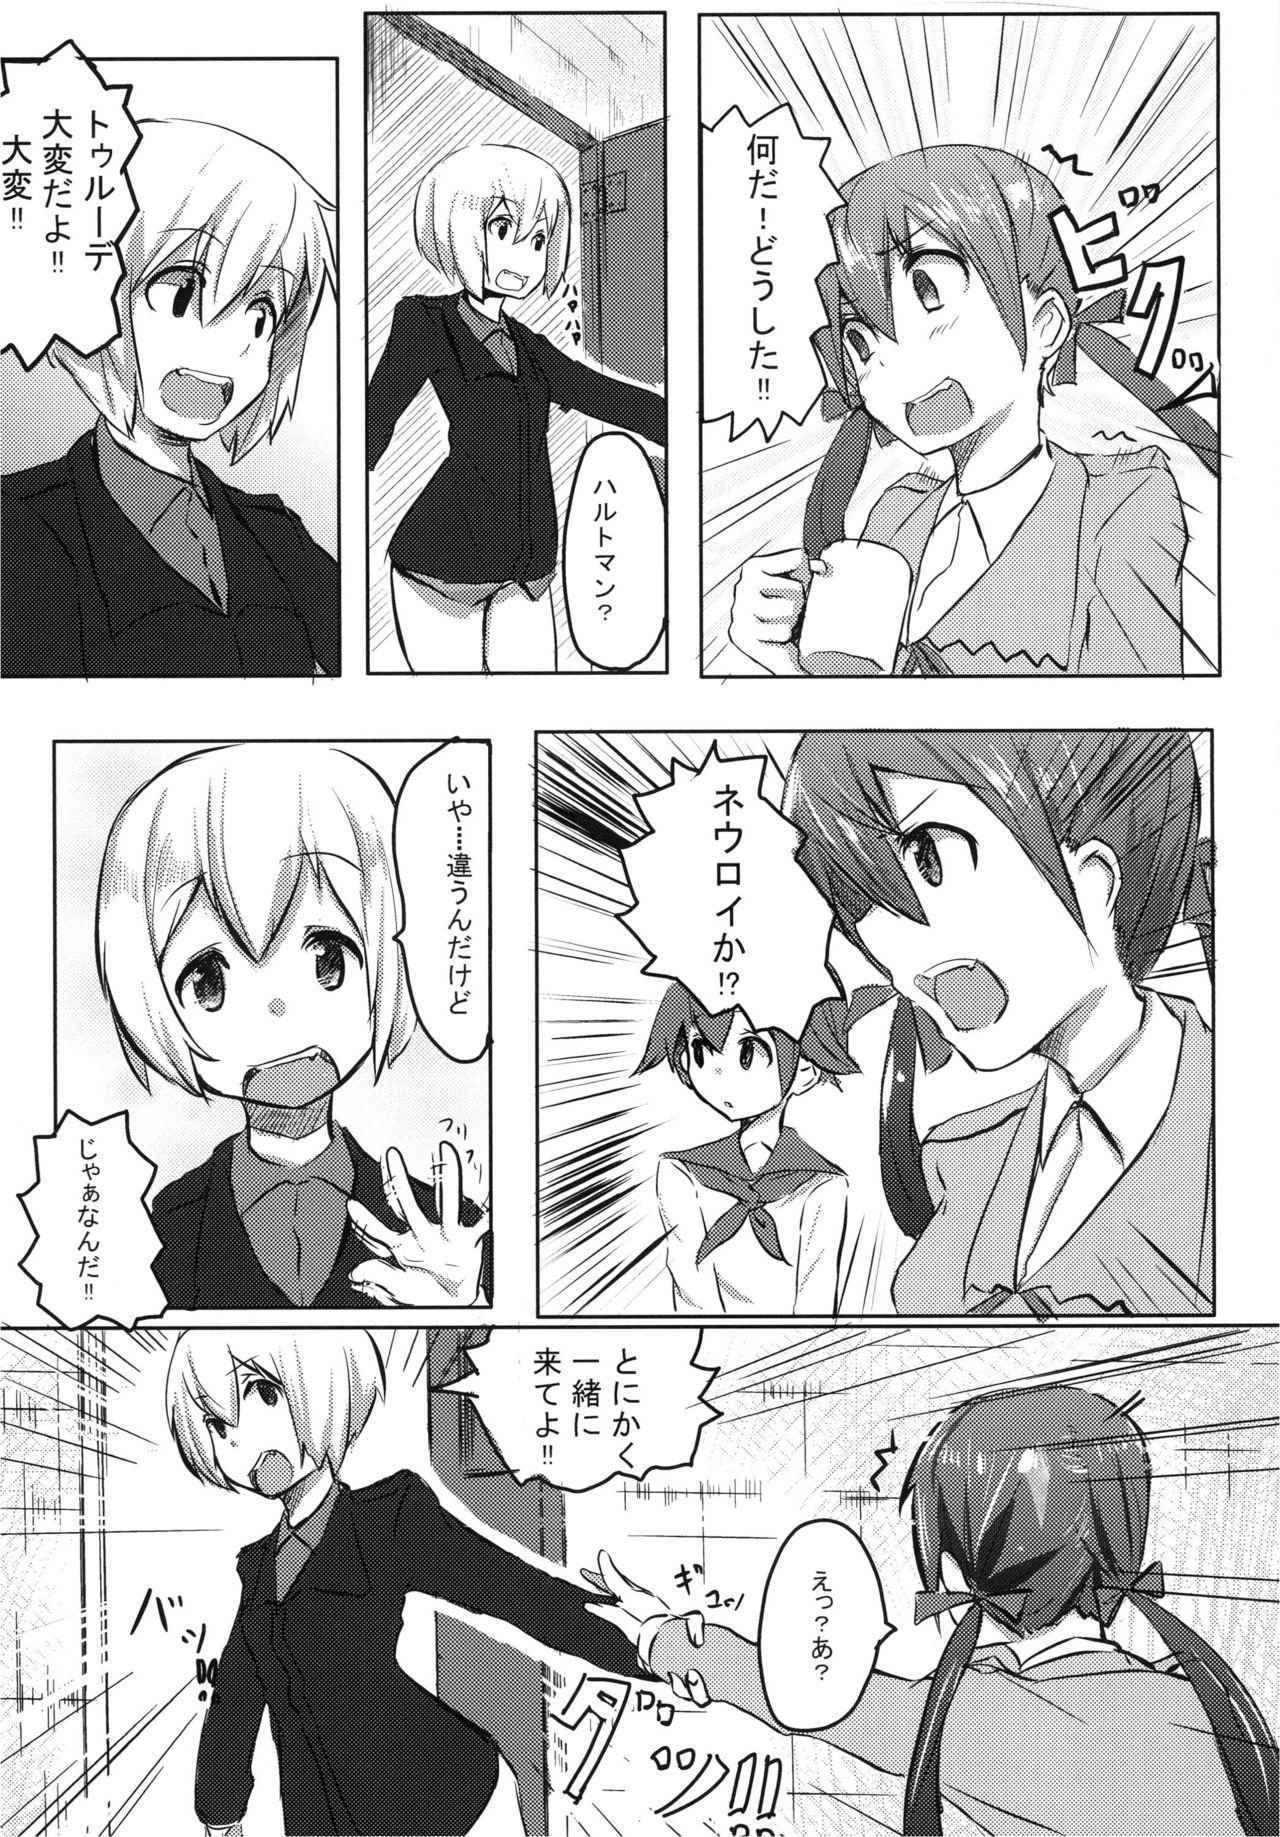 Russian FLIEGERASS - Strike witches Enema - Page 5